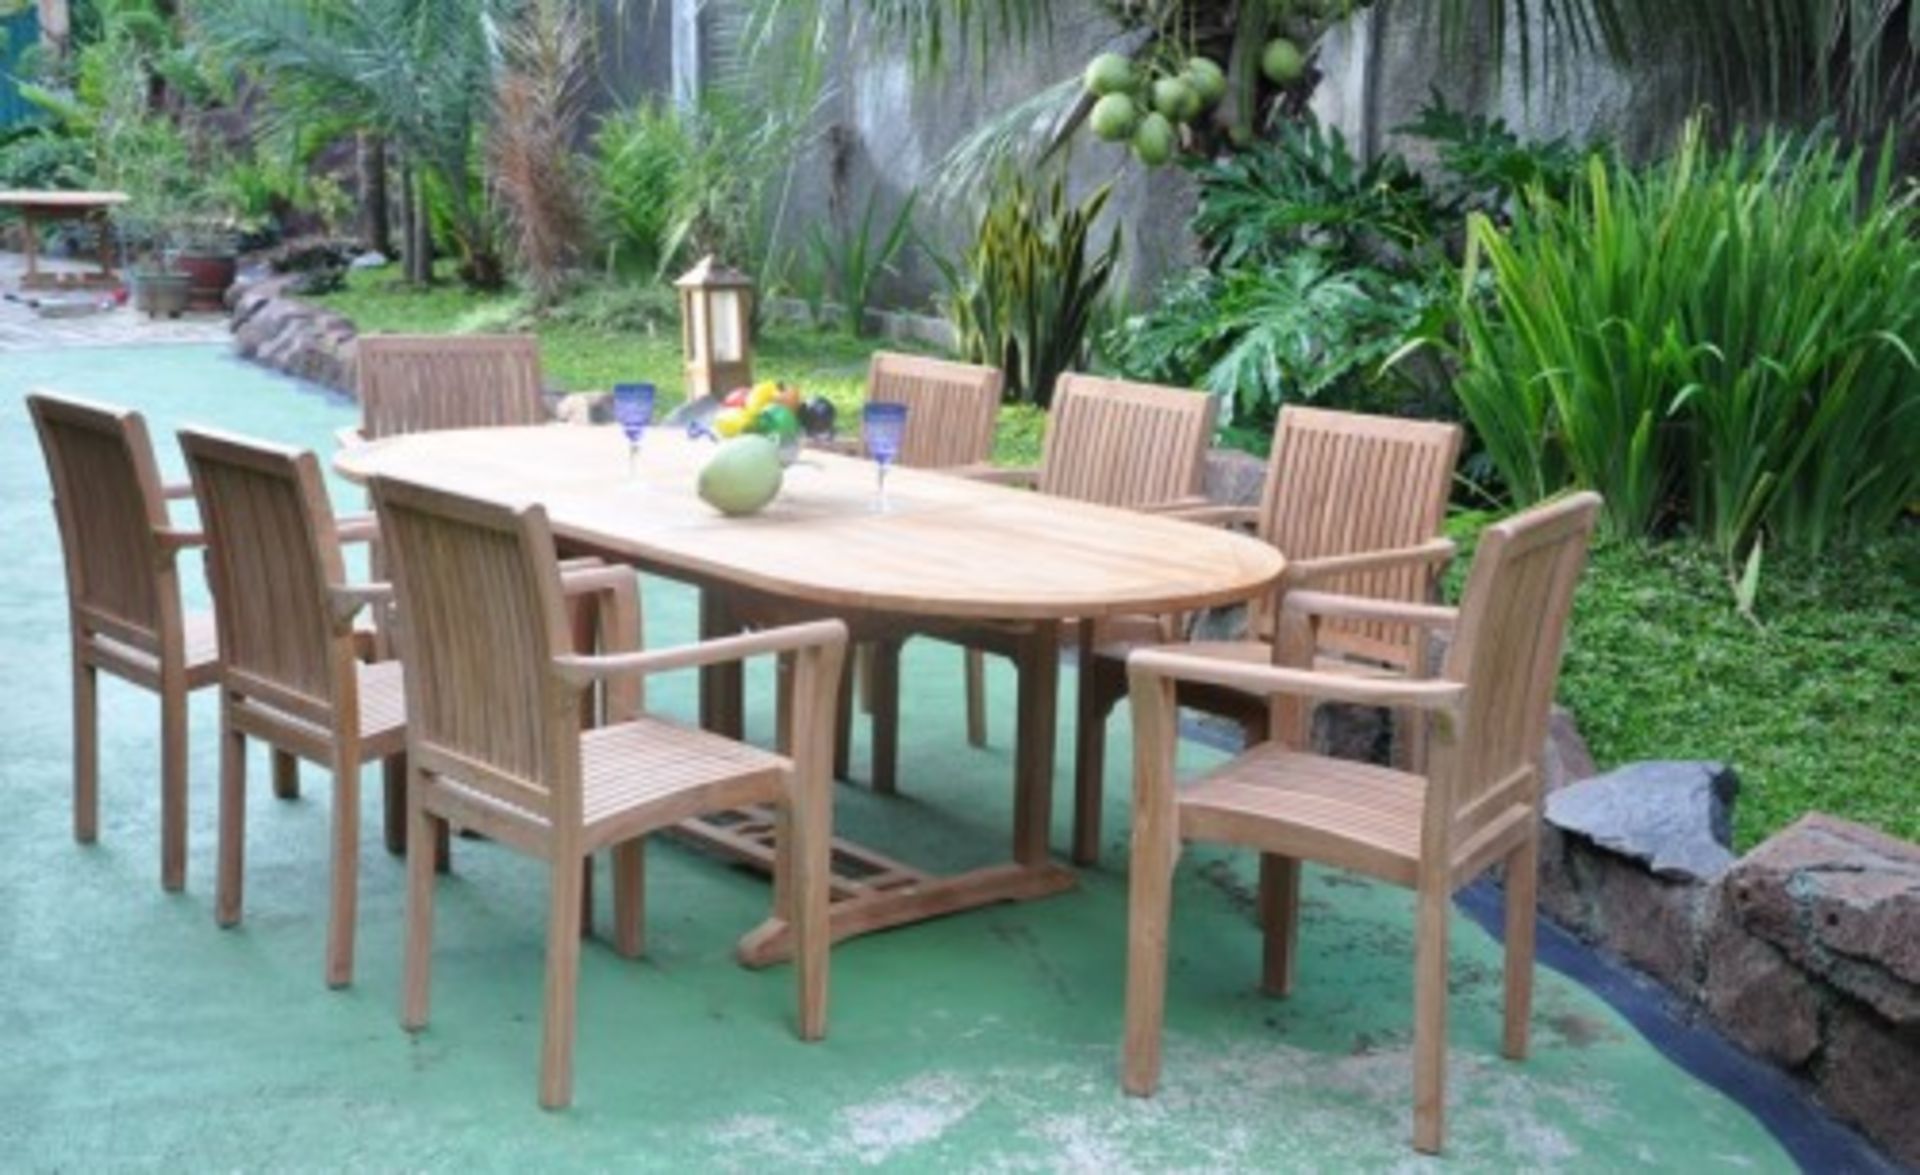 V Brand New Teak Double Extended Oval Table Set Allows For Up To10 People including 10 stacking